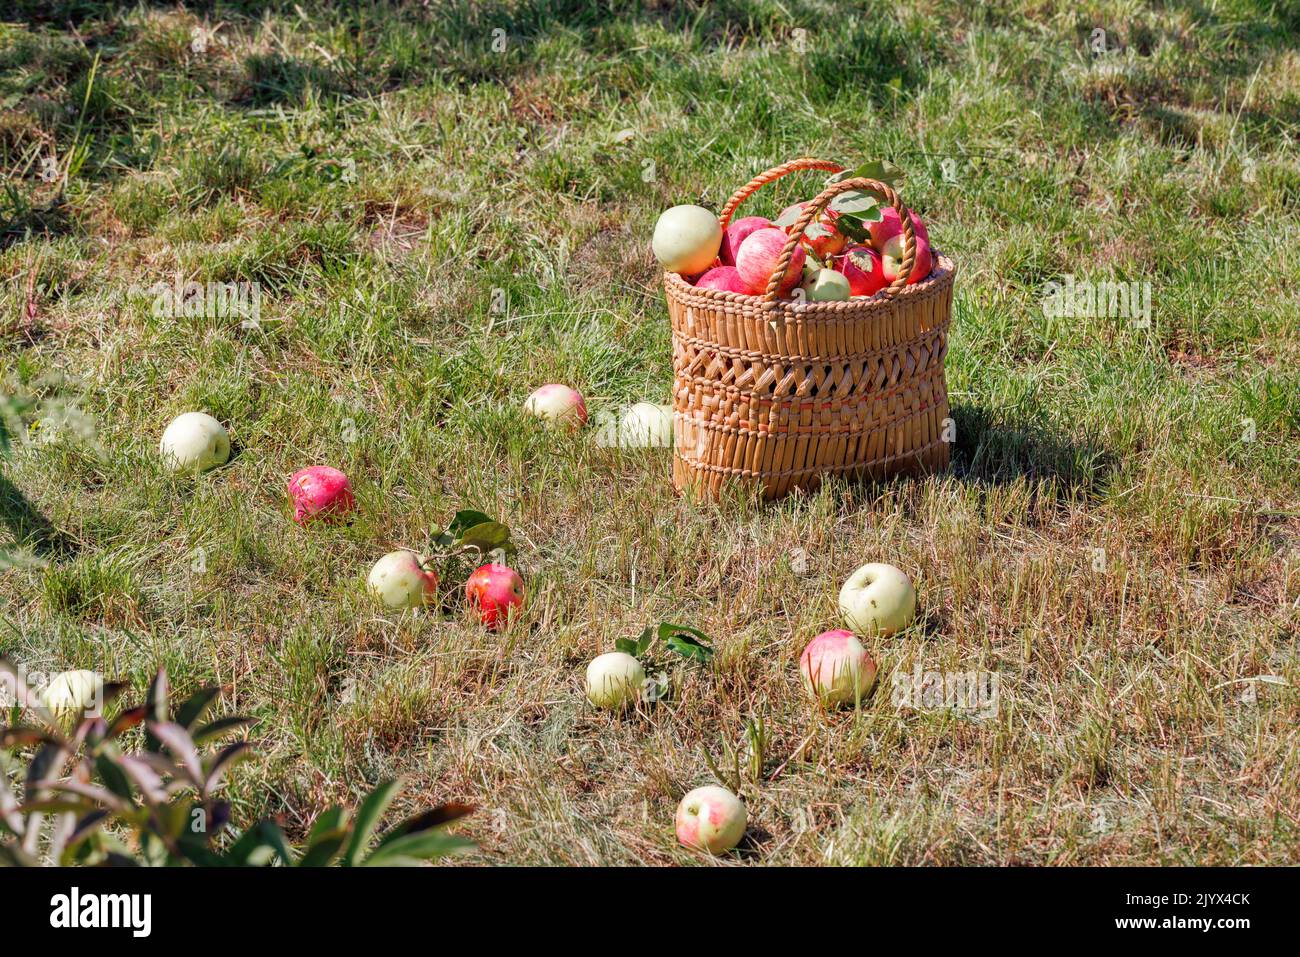 Ripe juicy apples in a straw basket against the background of a mowed green lawn are illuminated by the warm rays of the setting sun. Stock Photo